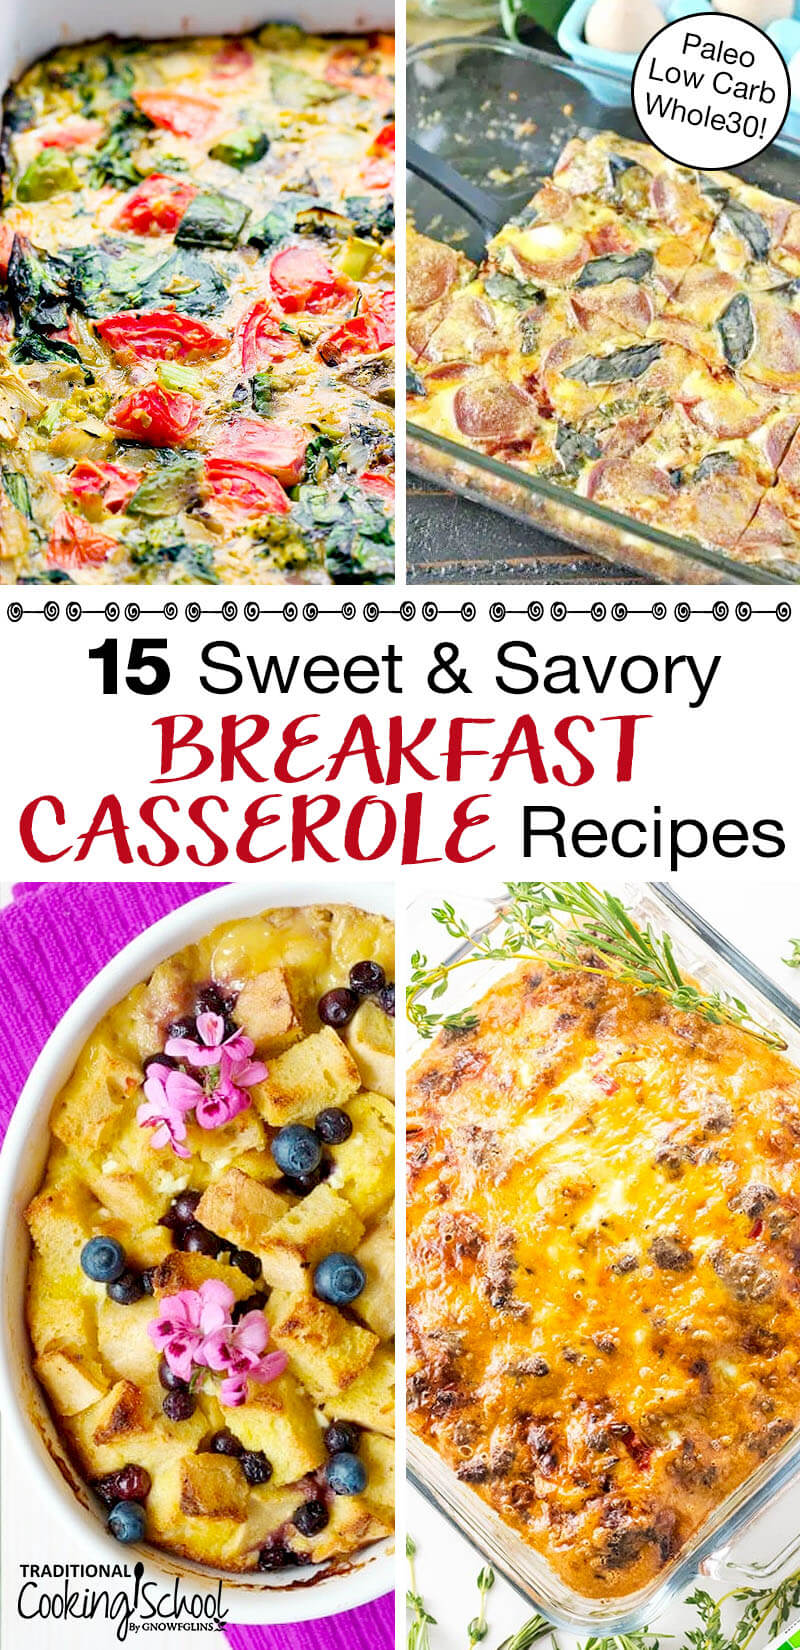 photo collage of make ahead, one pan breakfasts, with text overlay: "15 Sweet & Savory Breakfast Casserole Recipes (Paleo Low Carb Whole30!)"